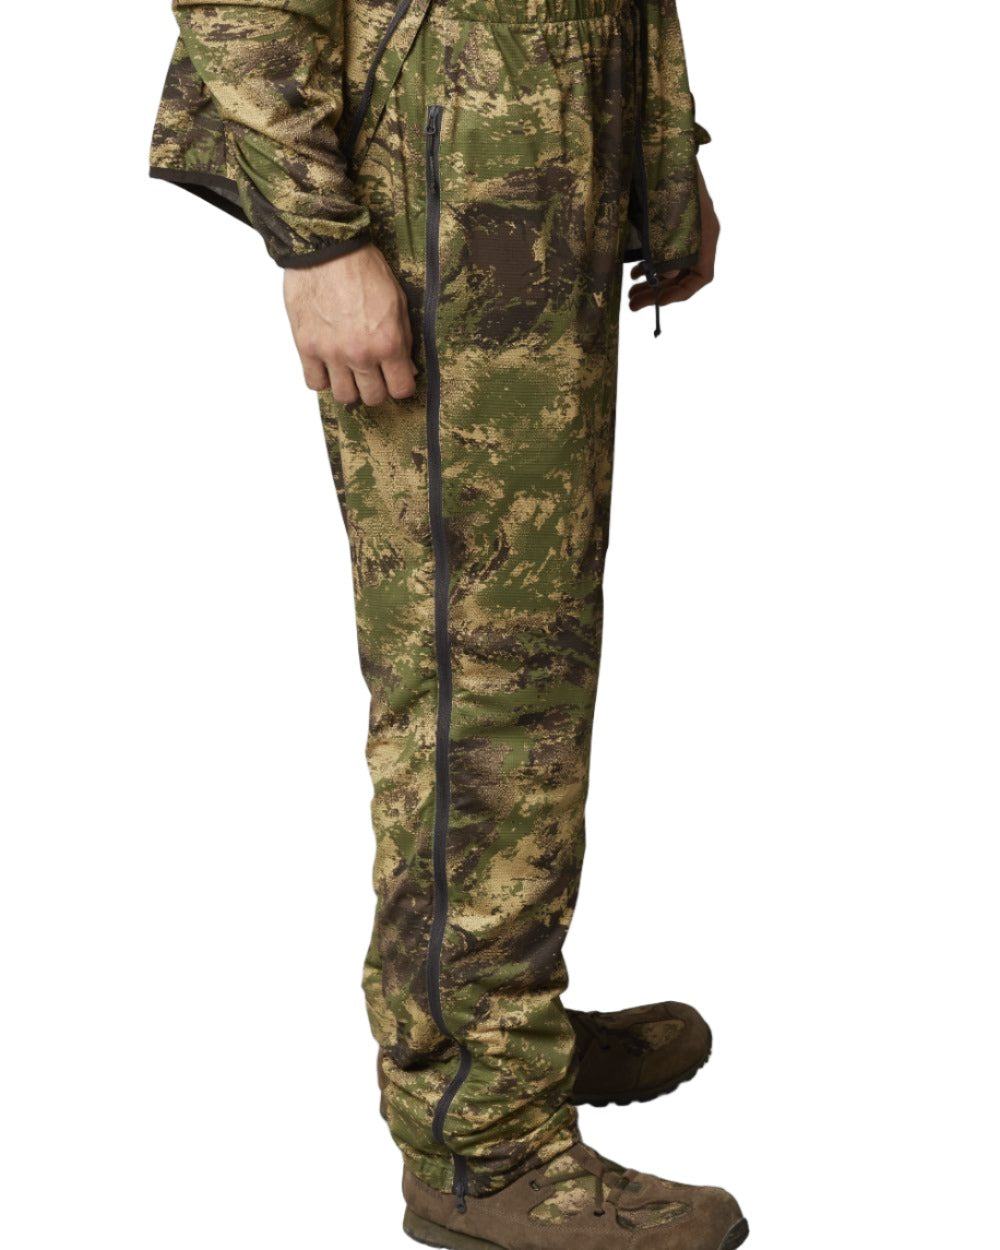 Axis Forest colour Harkila Deer Stalker Camo Cover Trousers on white background 